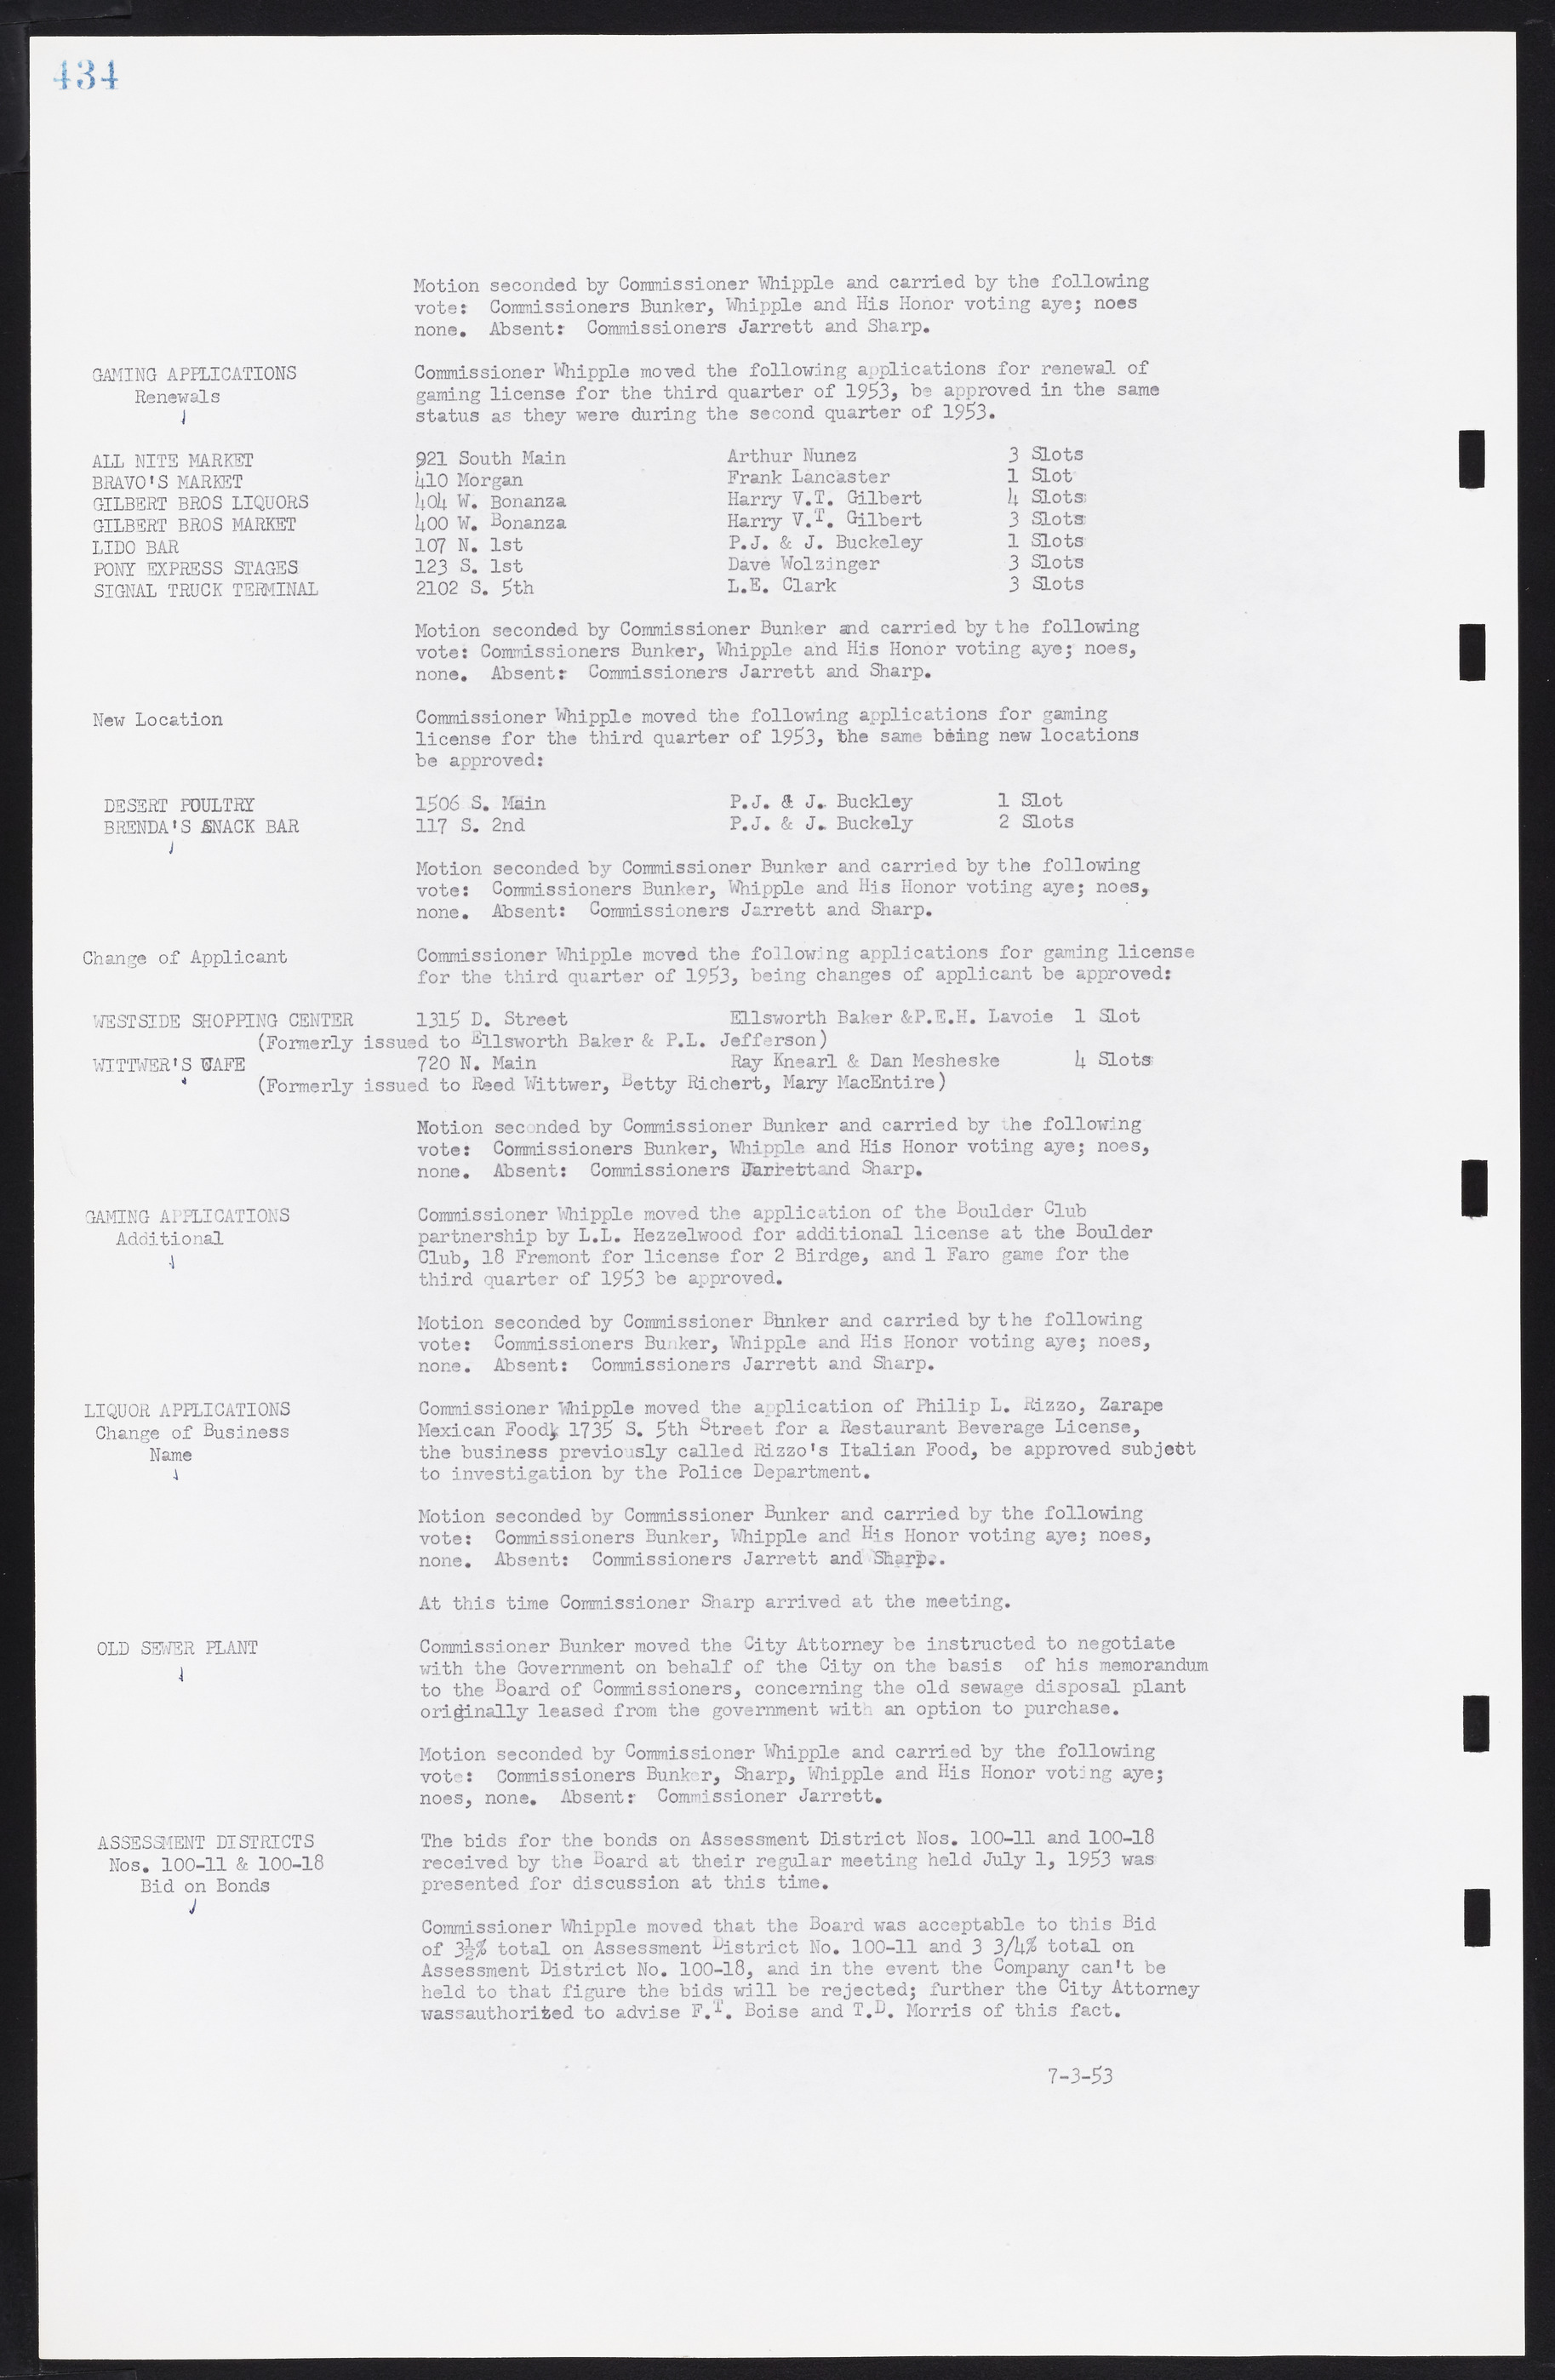 Las Vegas City Commission Minutes, May 26, 1952 to February 17, 1954, lvc000008-464